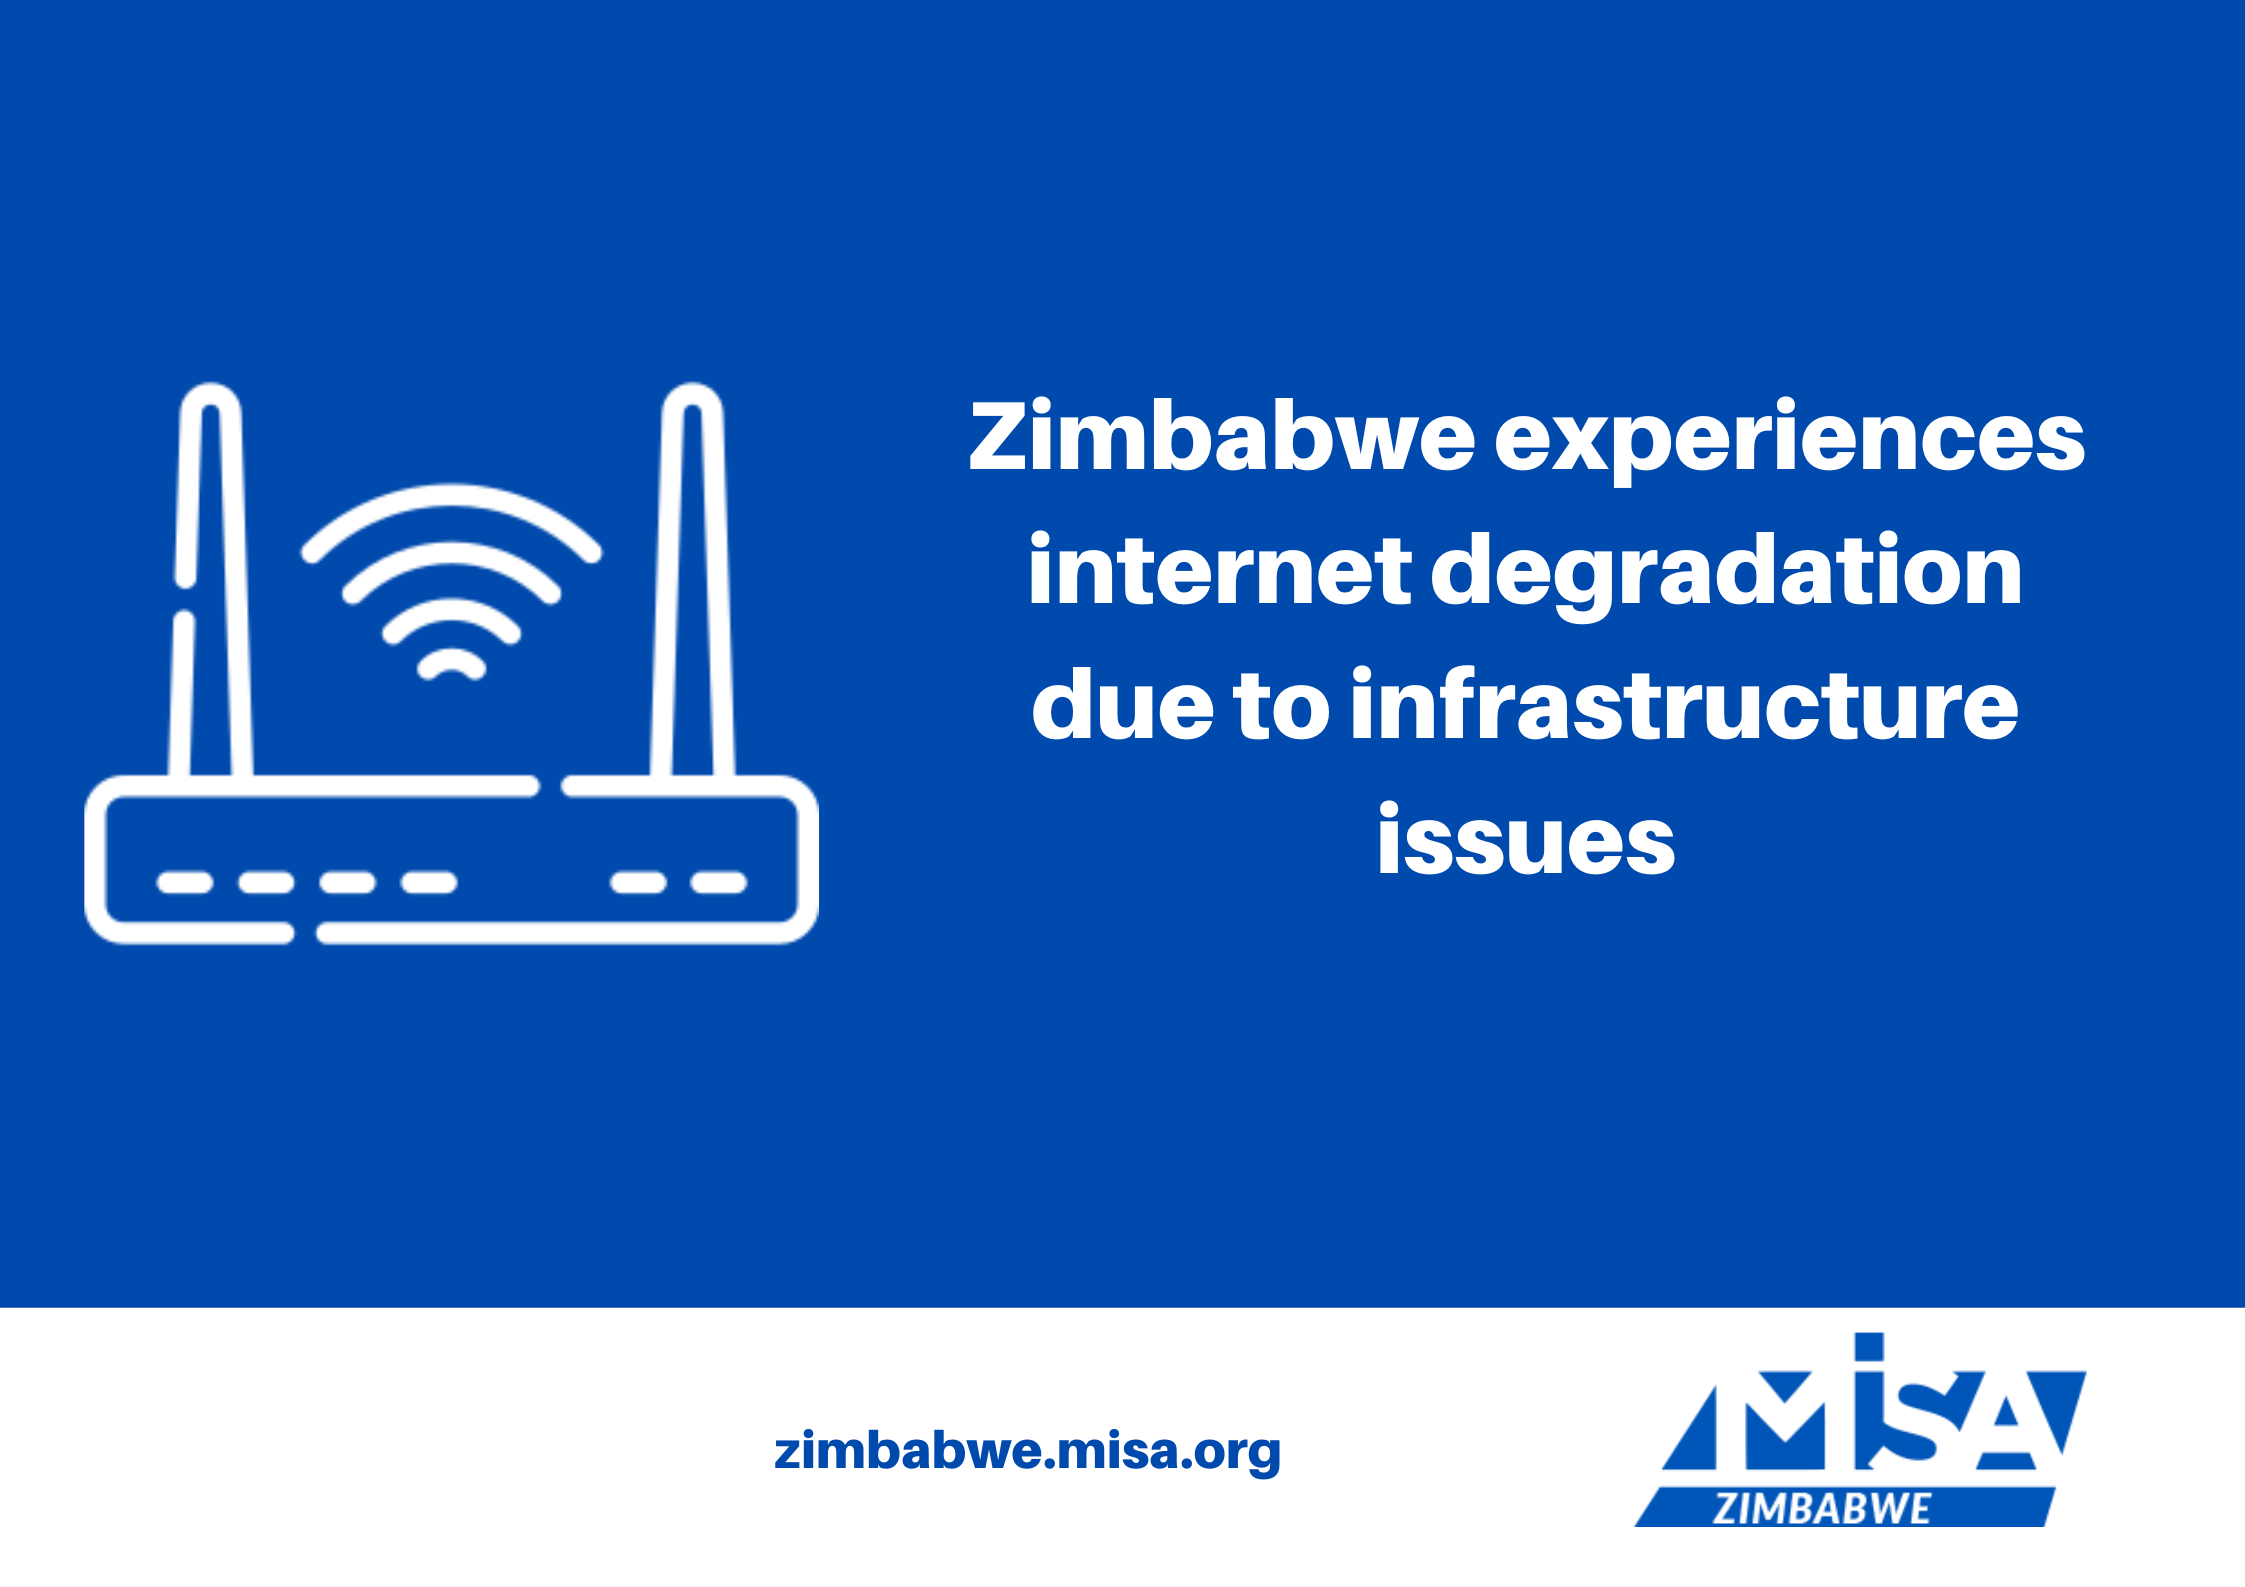 Zimbabwe experiences internet degradation due to infrastructure issues